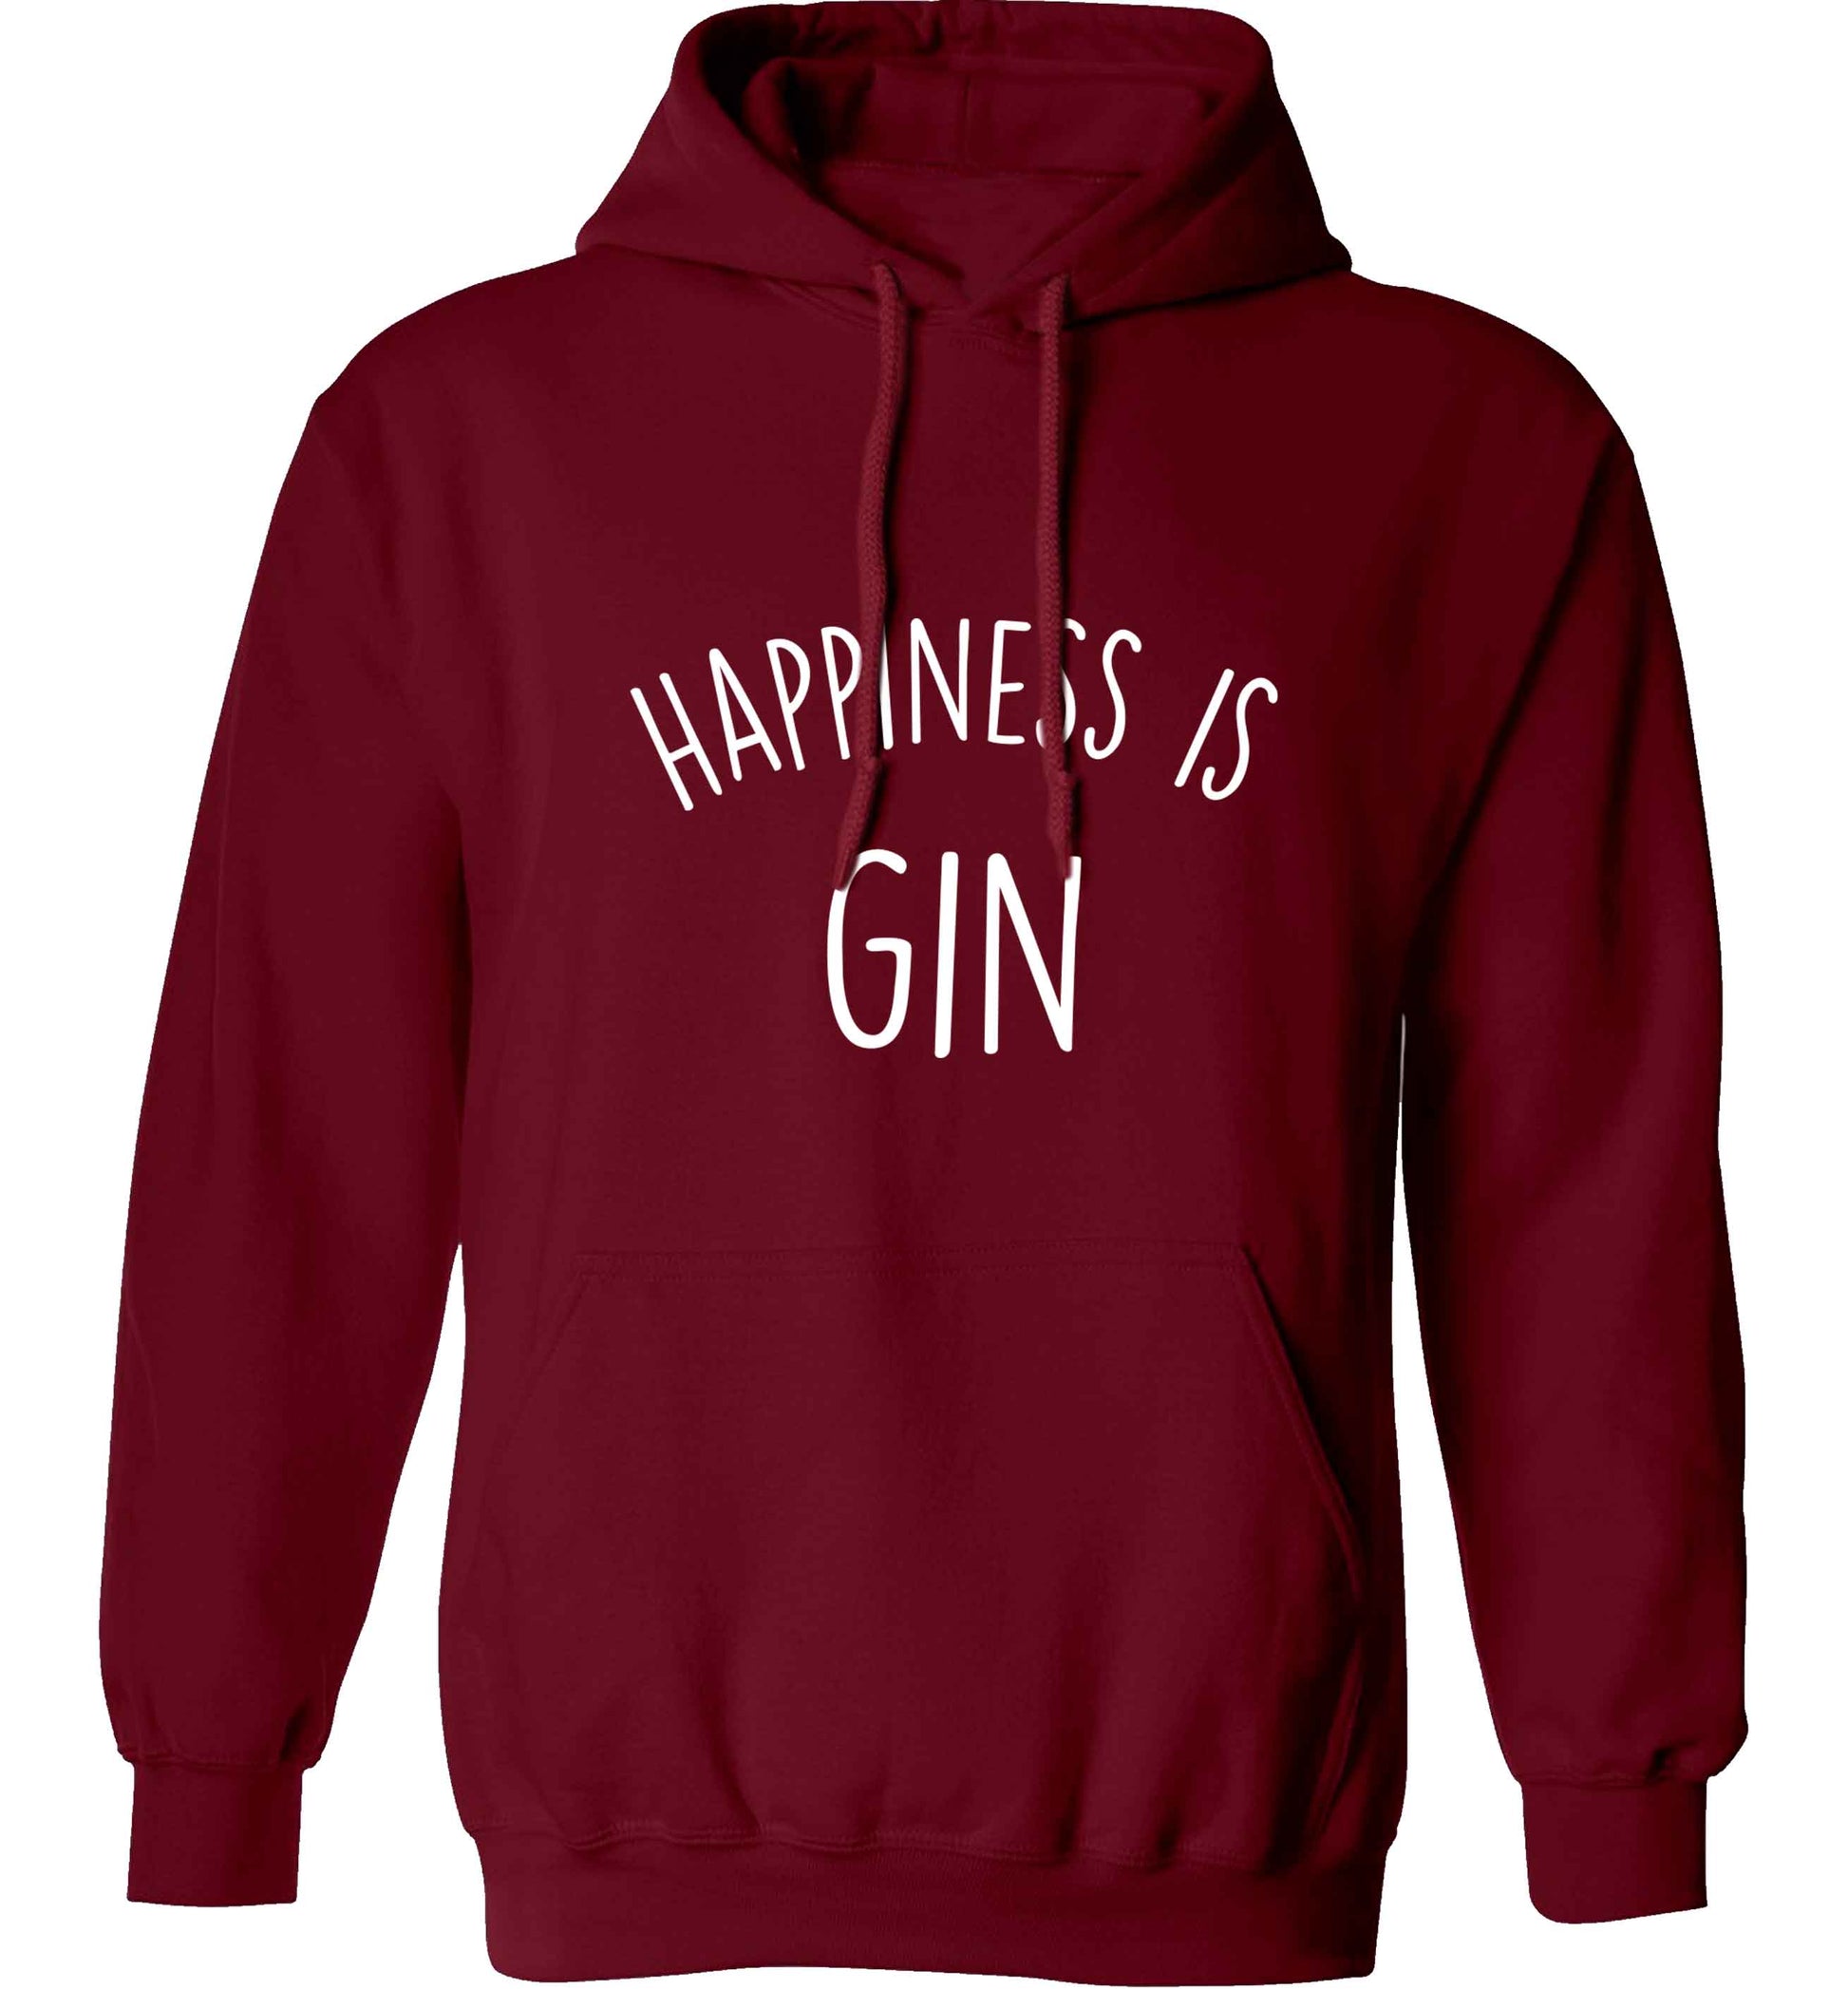 Happiness is gin adults unisex maroon hoodie 2XL